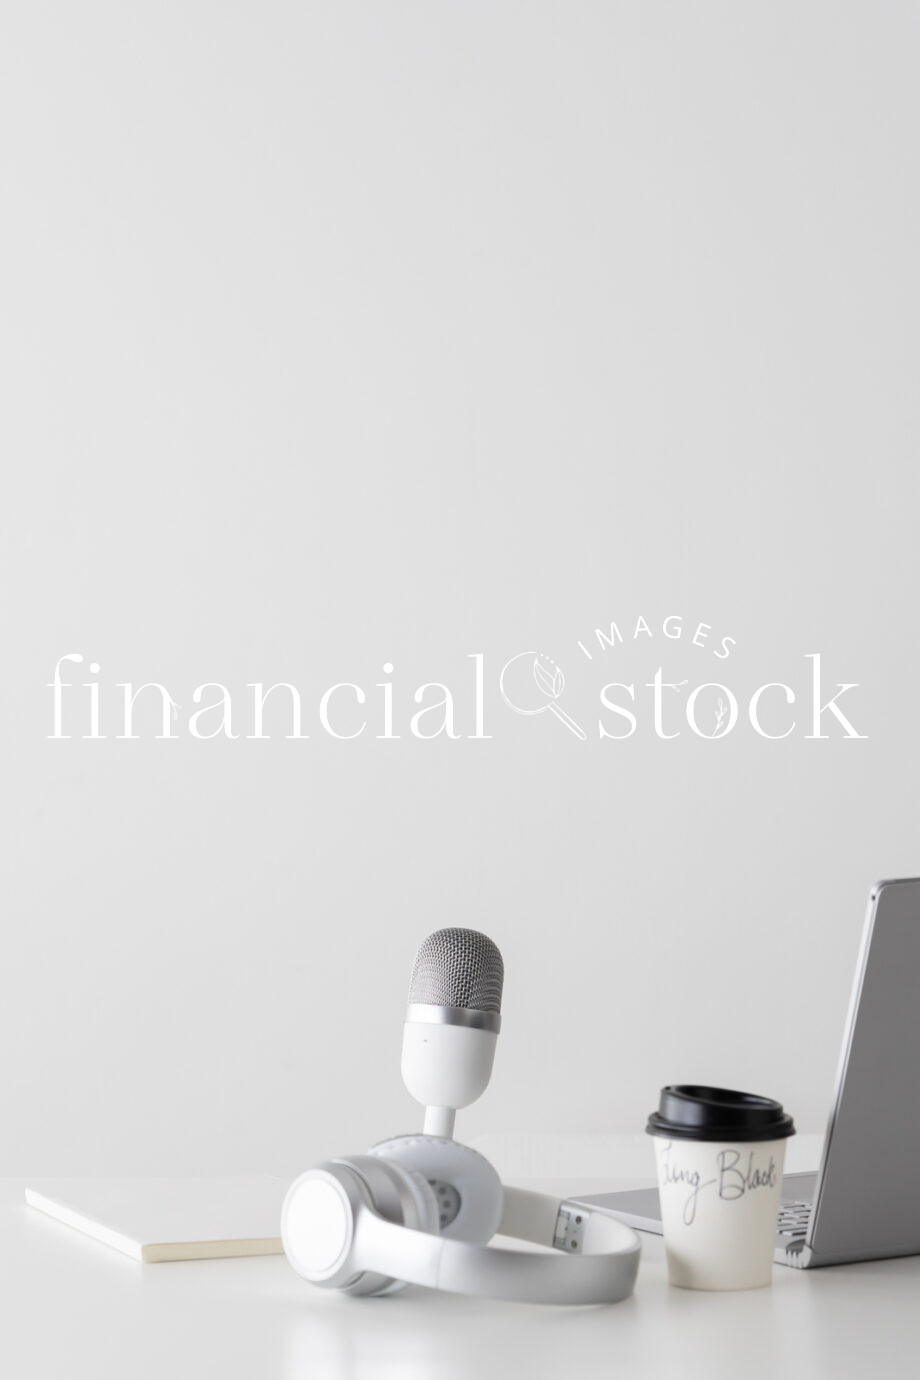 Financial Stock Images - Building a small home business and poscasting.